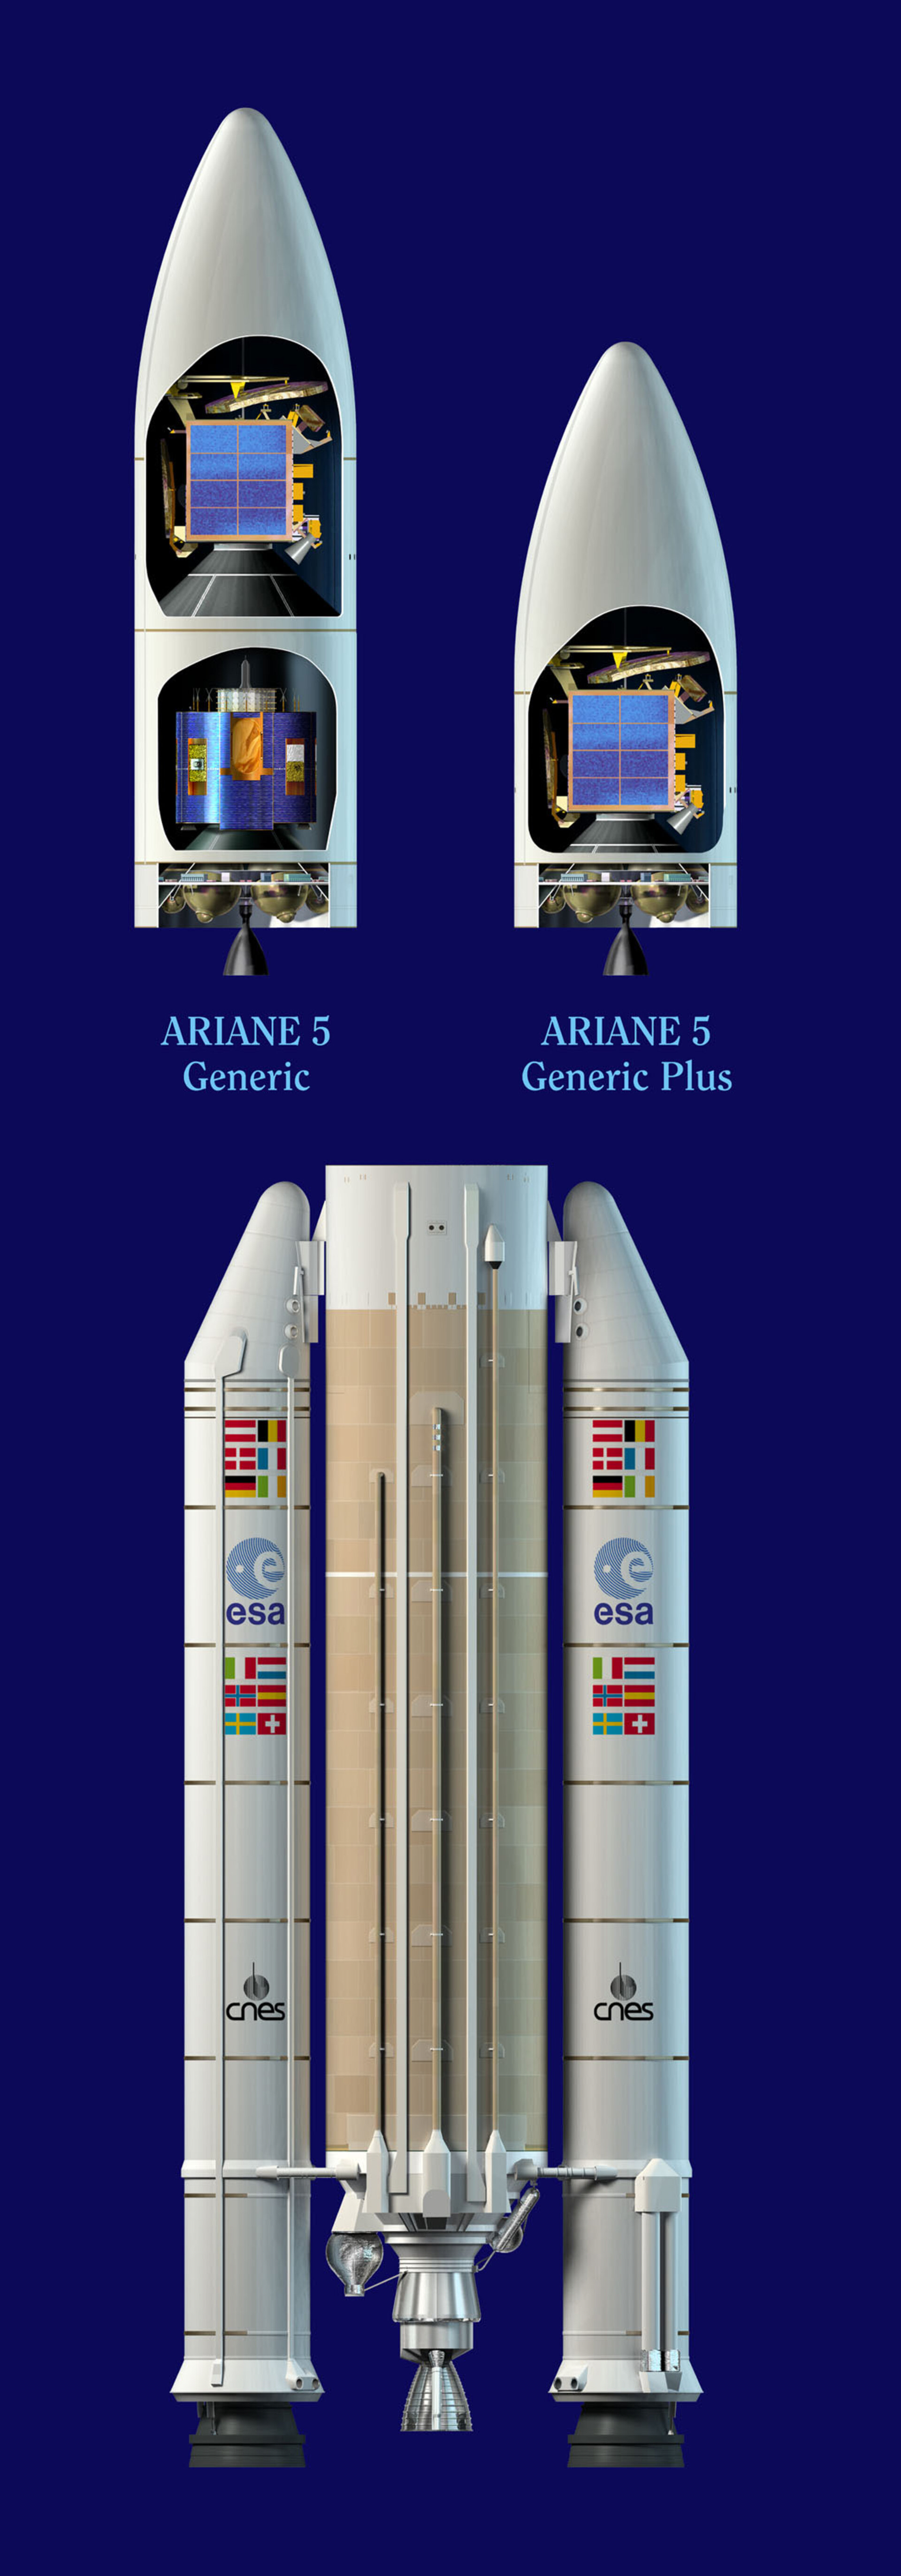 Artist view of the Ariane 5G and Ariane 5E launch vehicles